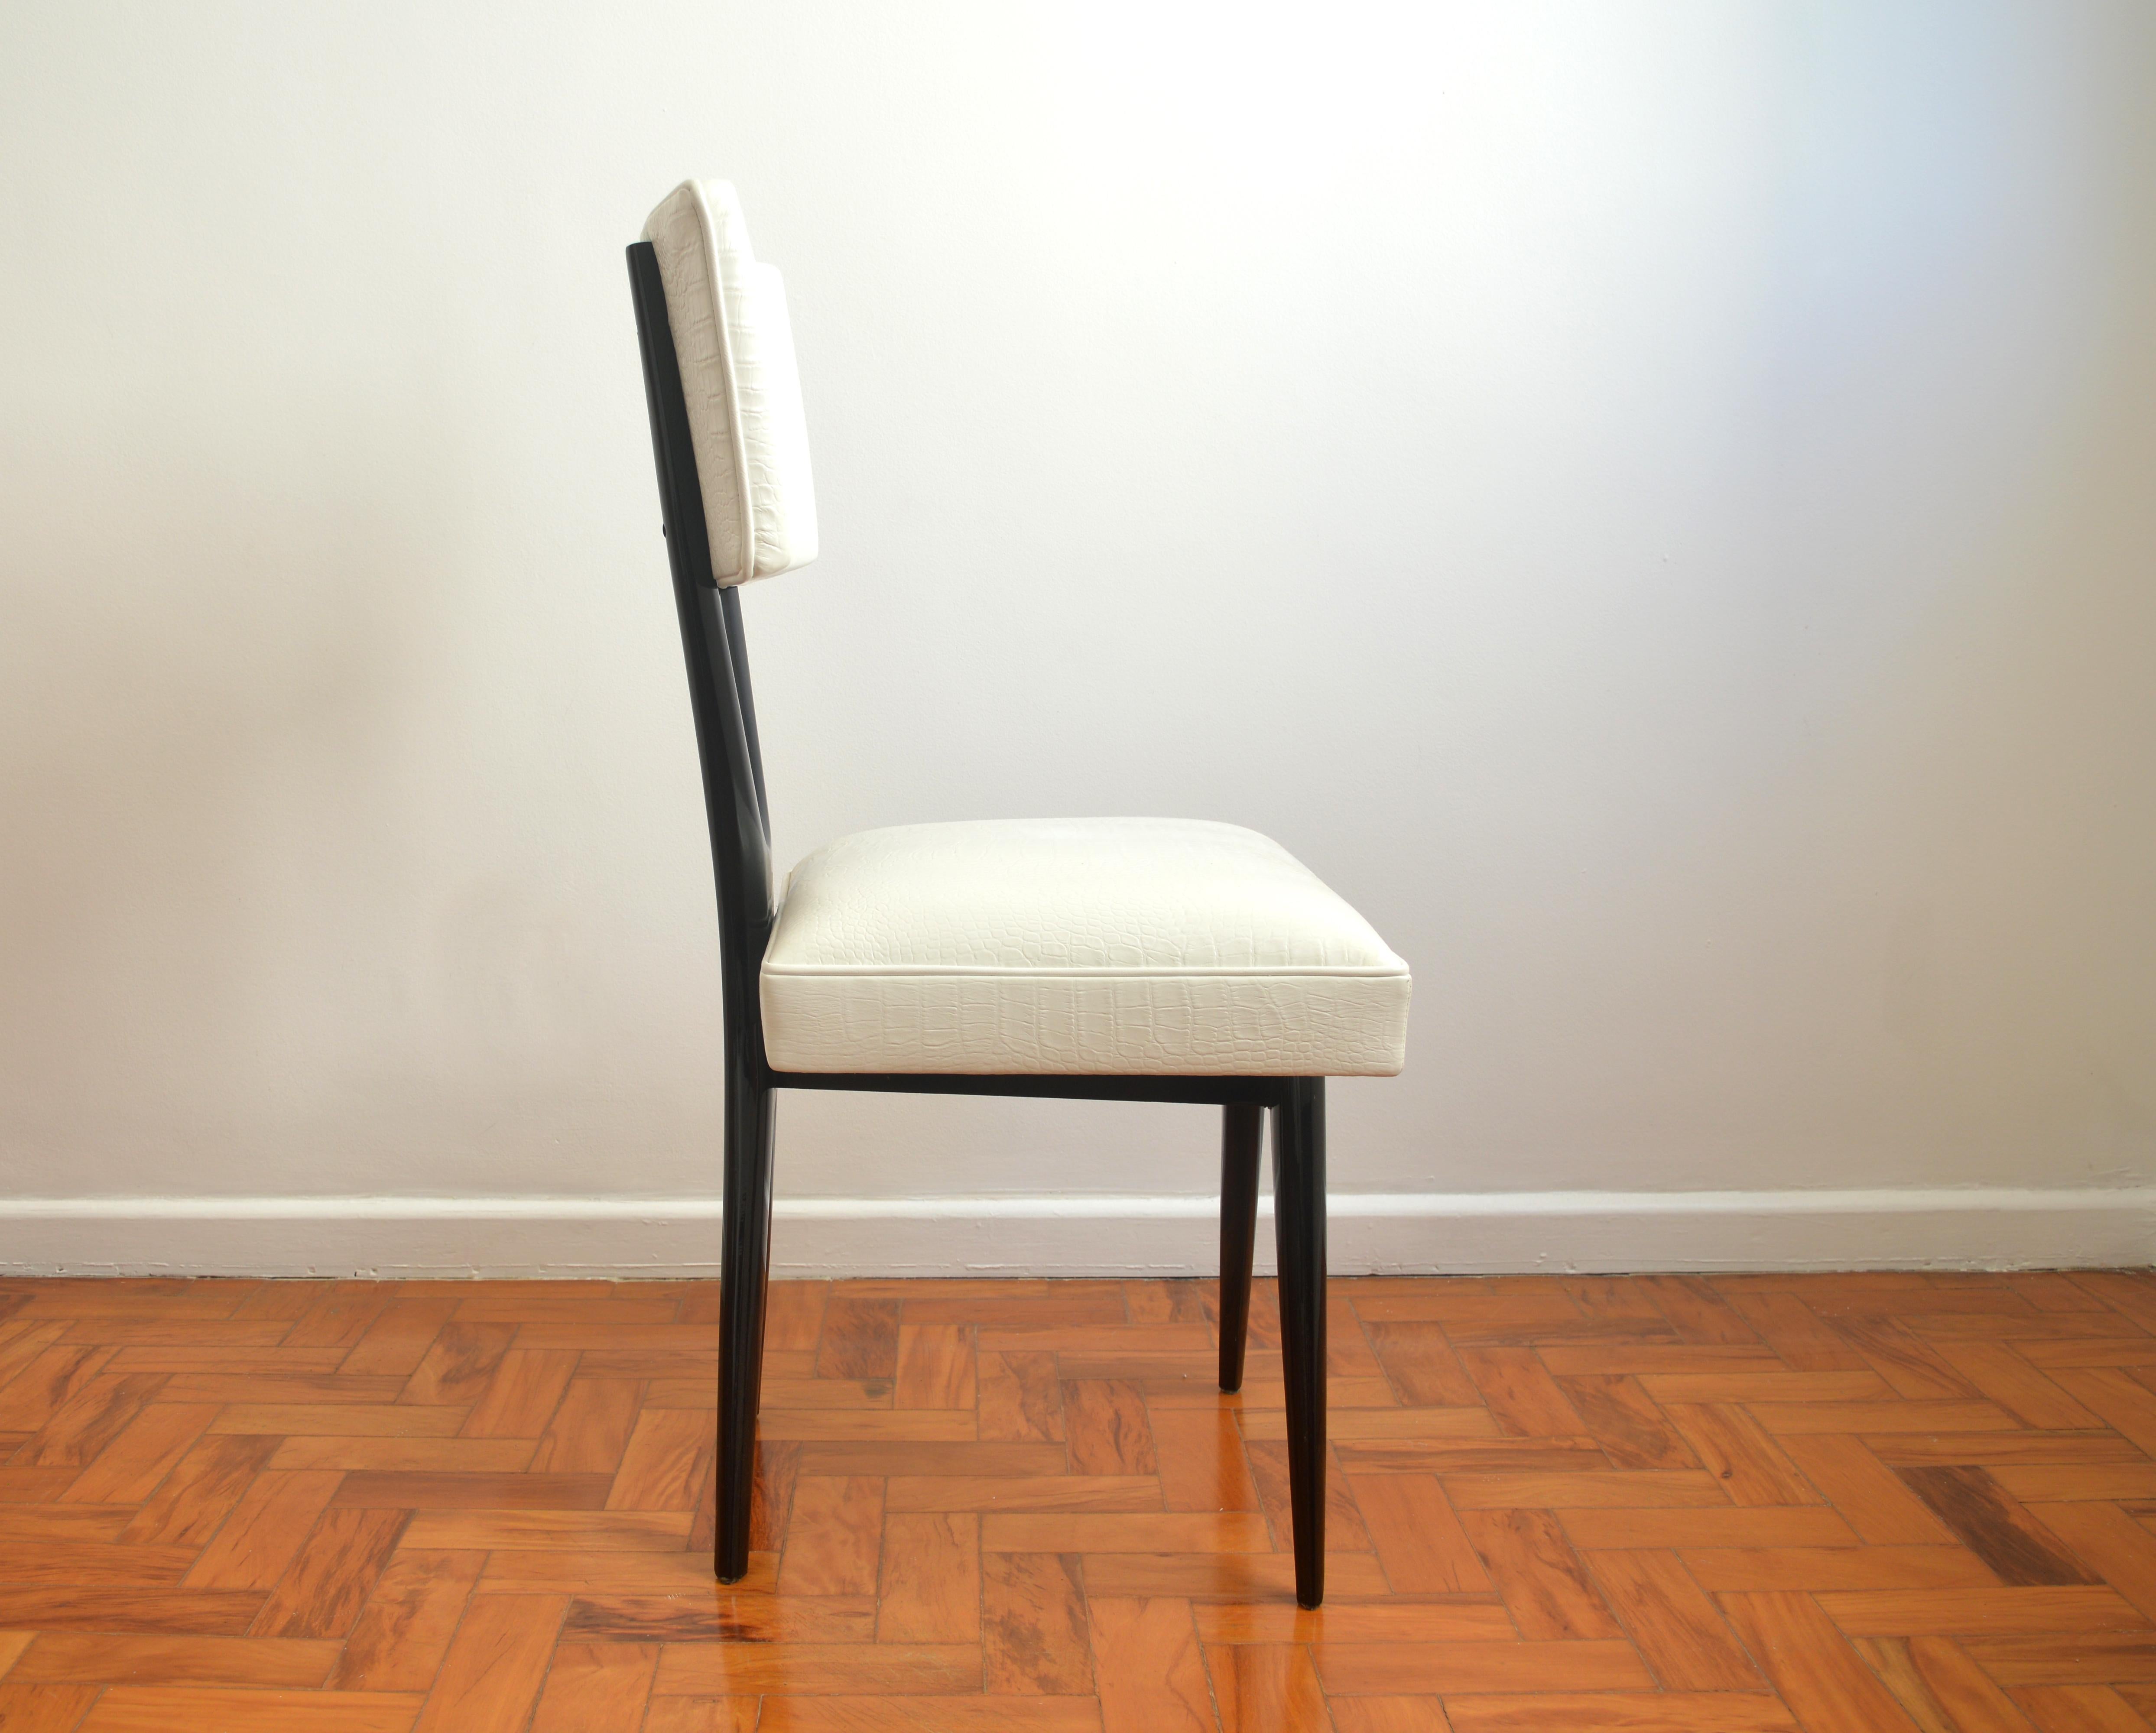 Brazilian Giuseppe Scapinelli Ebonized Dining Chair Made in the 1950's For Sale